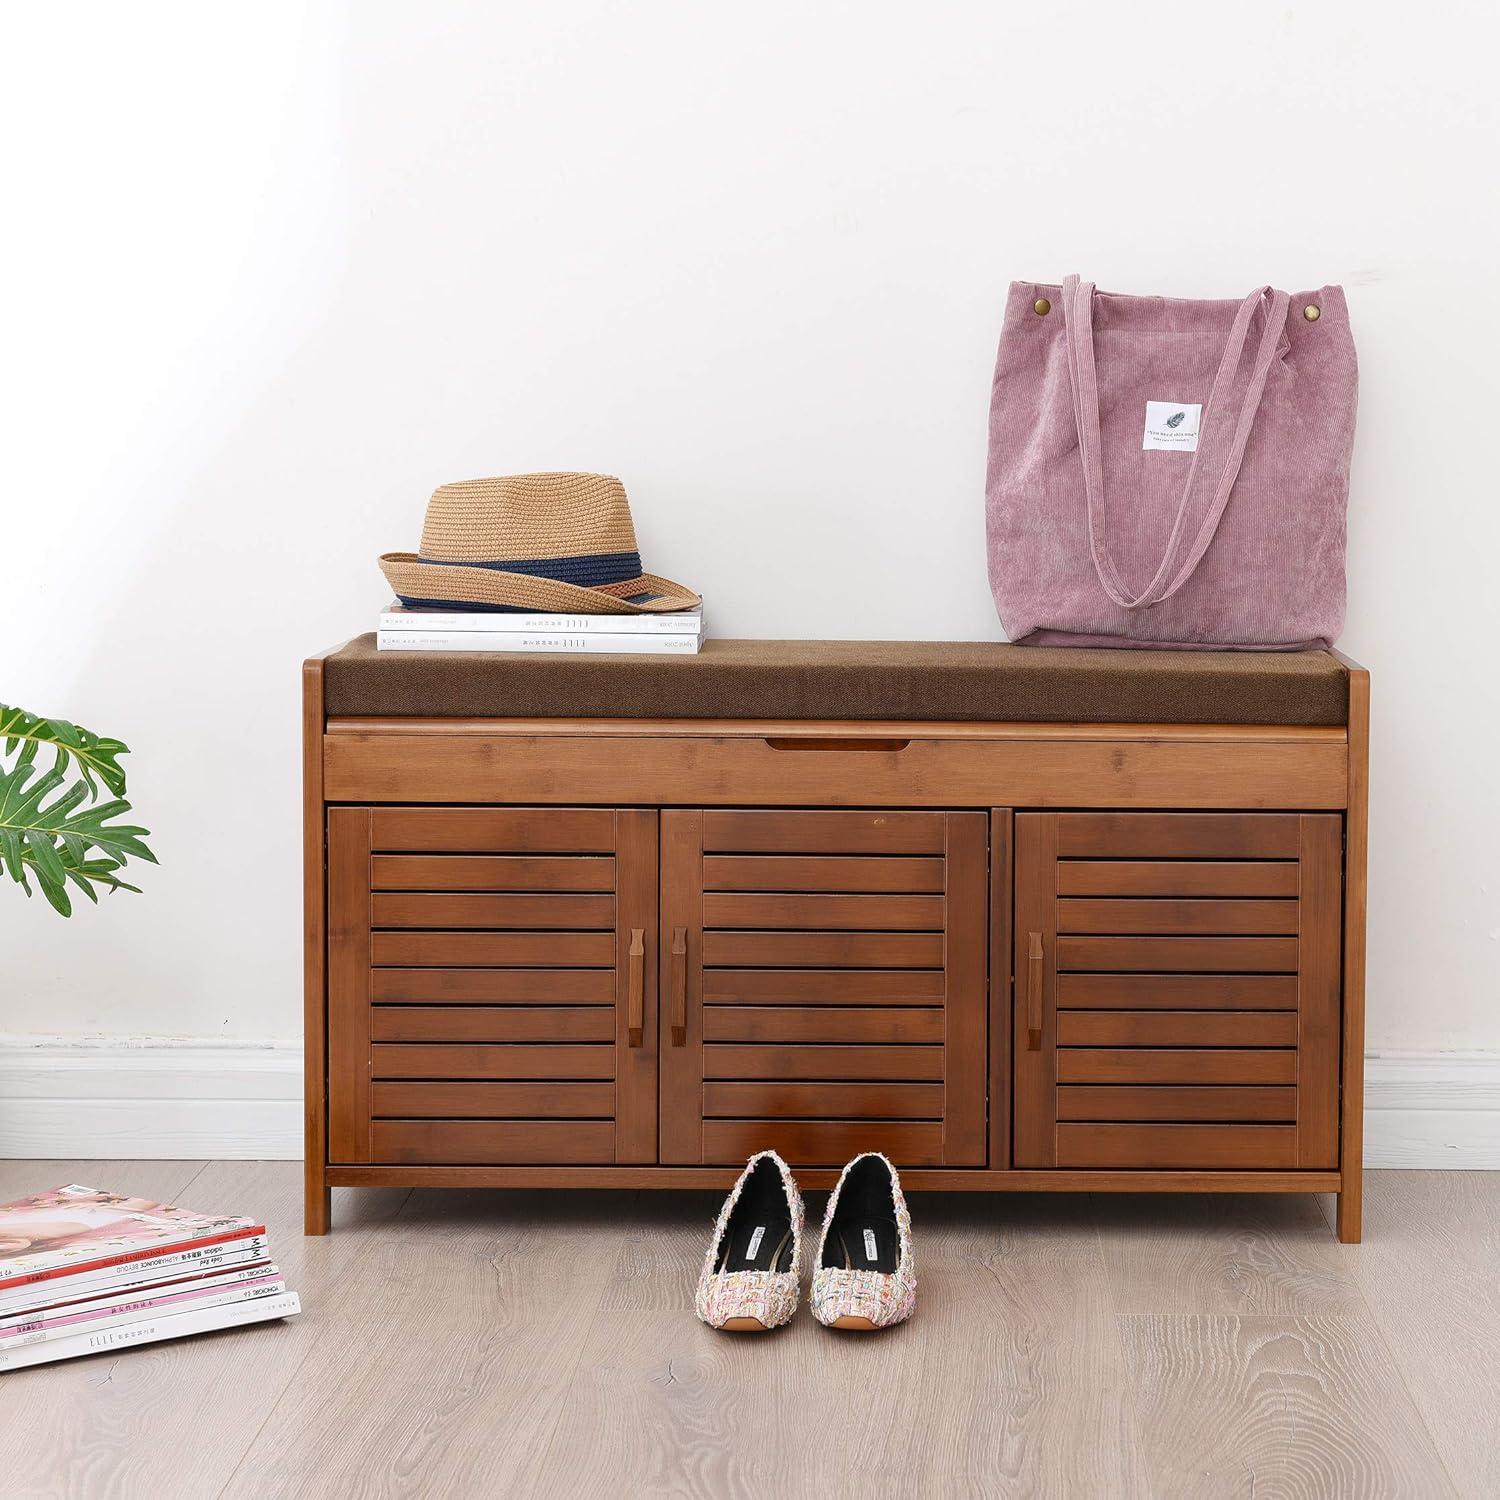 Bamboo Entryway Bench with Hidden Shoe Storage and Detachable Cushion